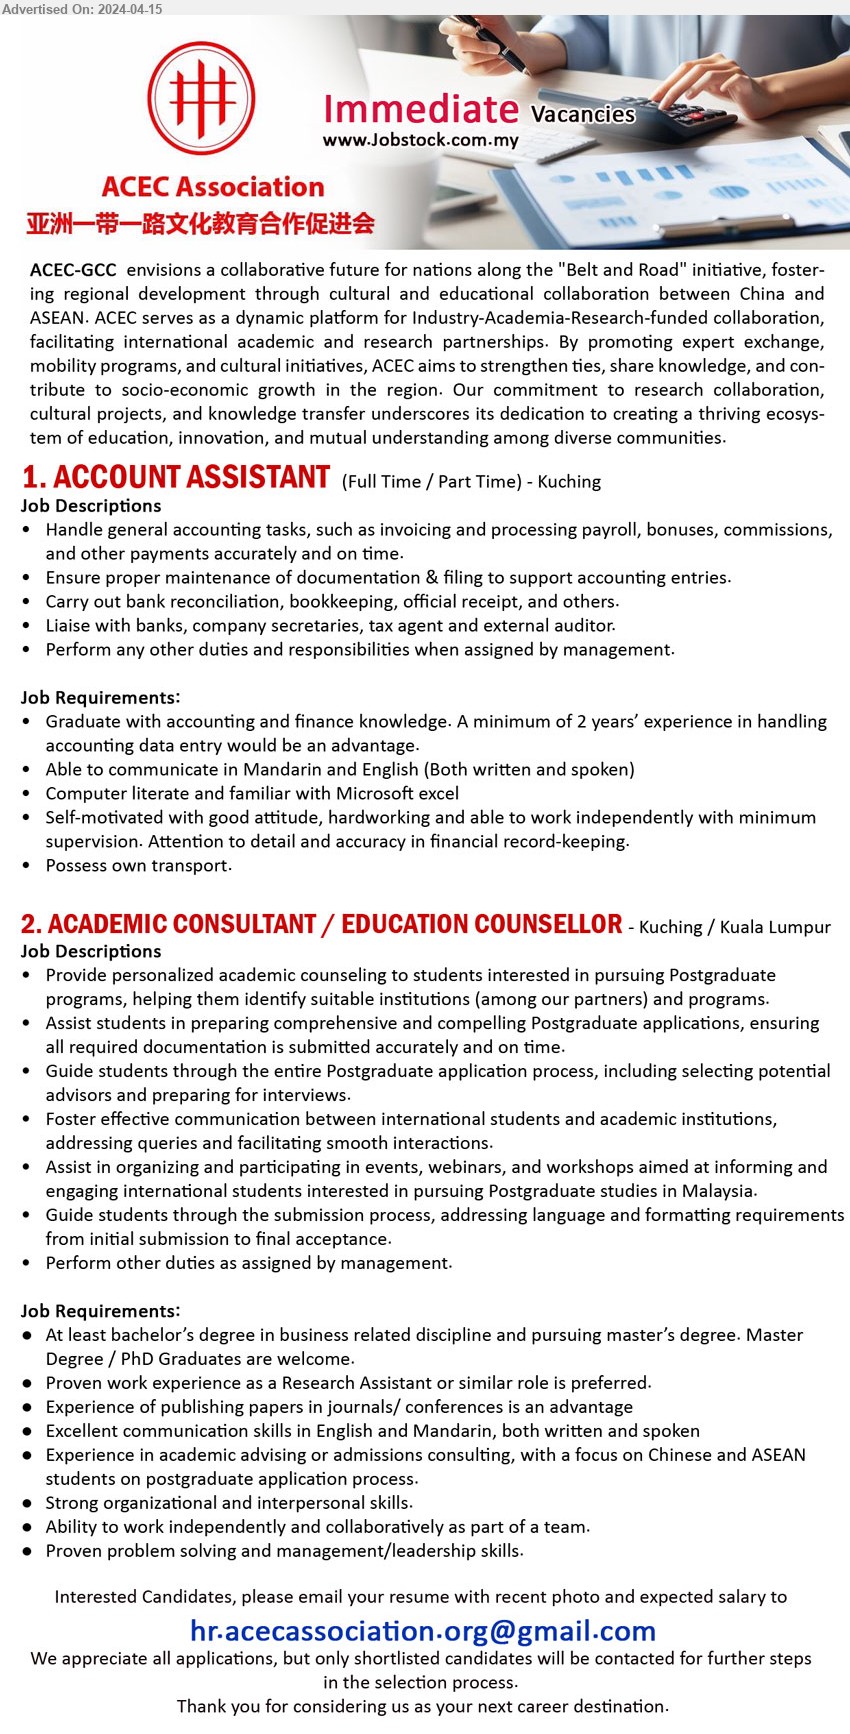 ACEC Association  - 1. ACCOUNT ASSISTANT  (Kuching), graduate with accounting and finance knowledge. A minimum of 2 years’ experience in handling 
accounting data entry would be an advantage,...
2. ACADEMIC CONSULTANT / EDUCATION COUNSELLOR (Kuching, KL), Bachelor’s Degree in Business related discipline and pursuing Master’s Degree. Master Degree / PhD Graduates are welcome, Experience of publishing papers in journals/ conferences is an advantage...
Email resume to ...